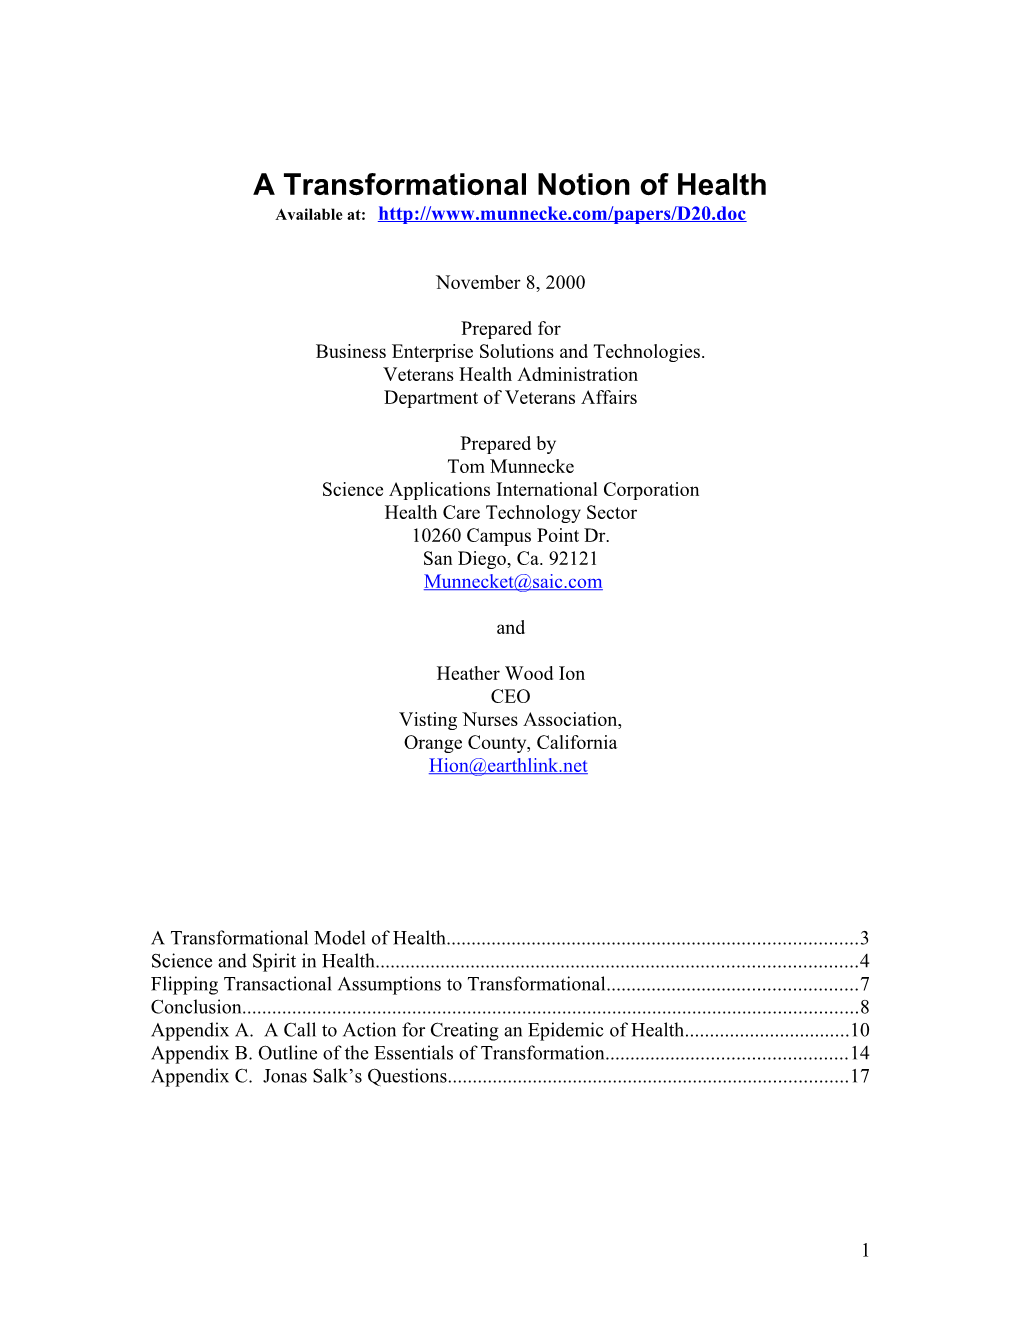 Brief Outline of the Essentials of Transformation